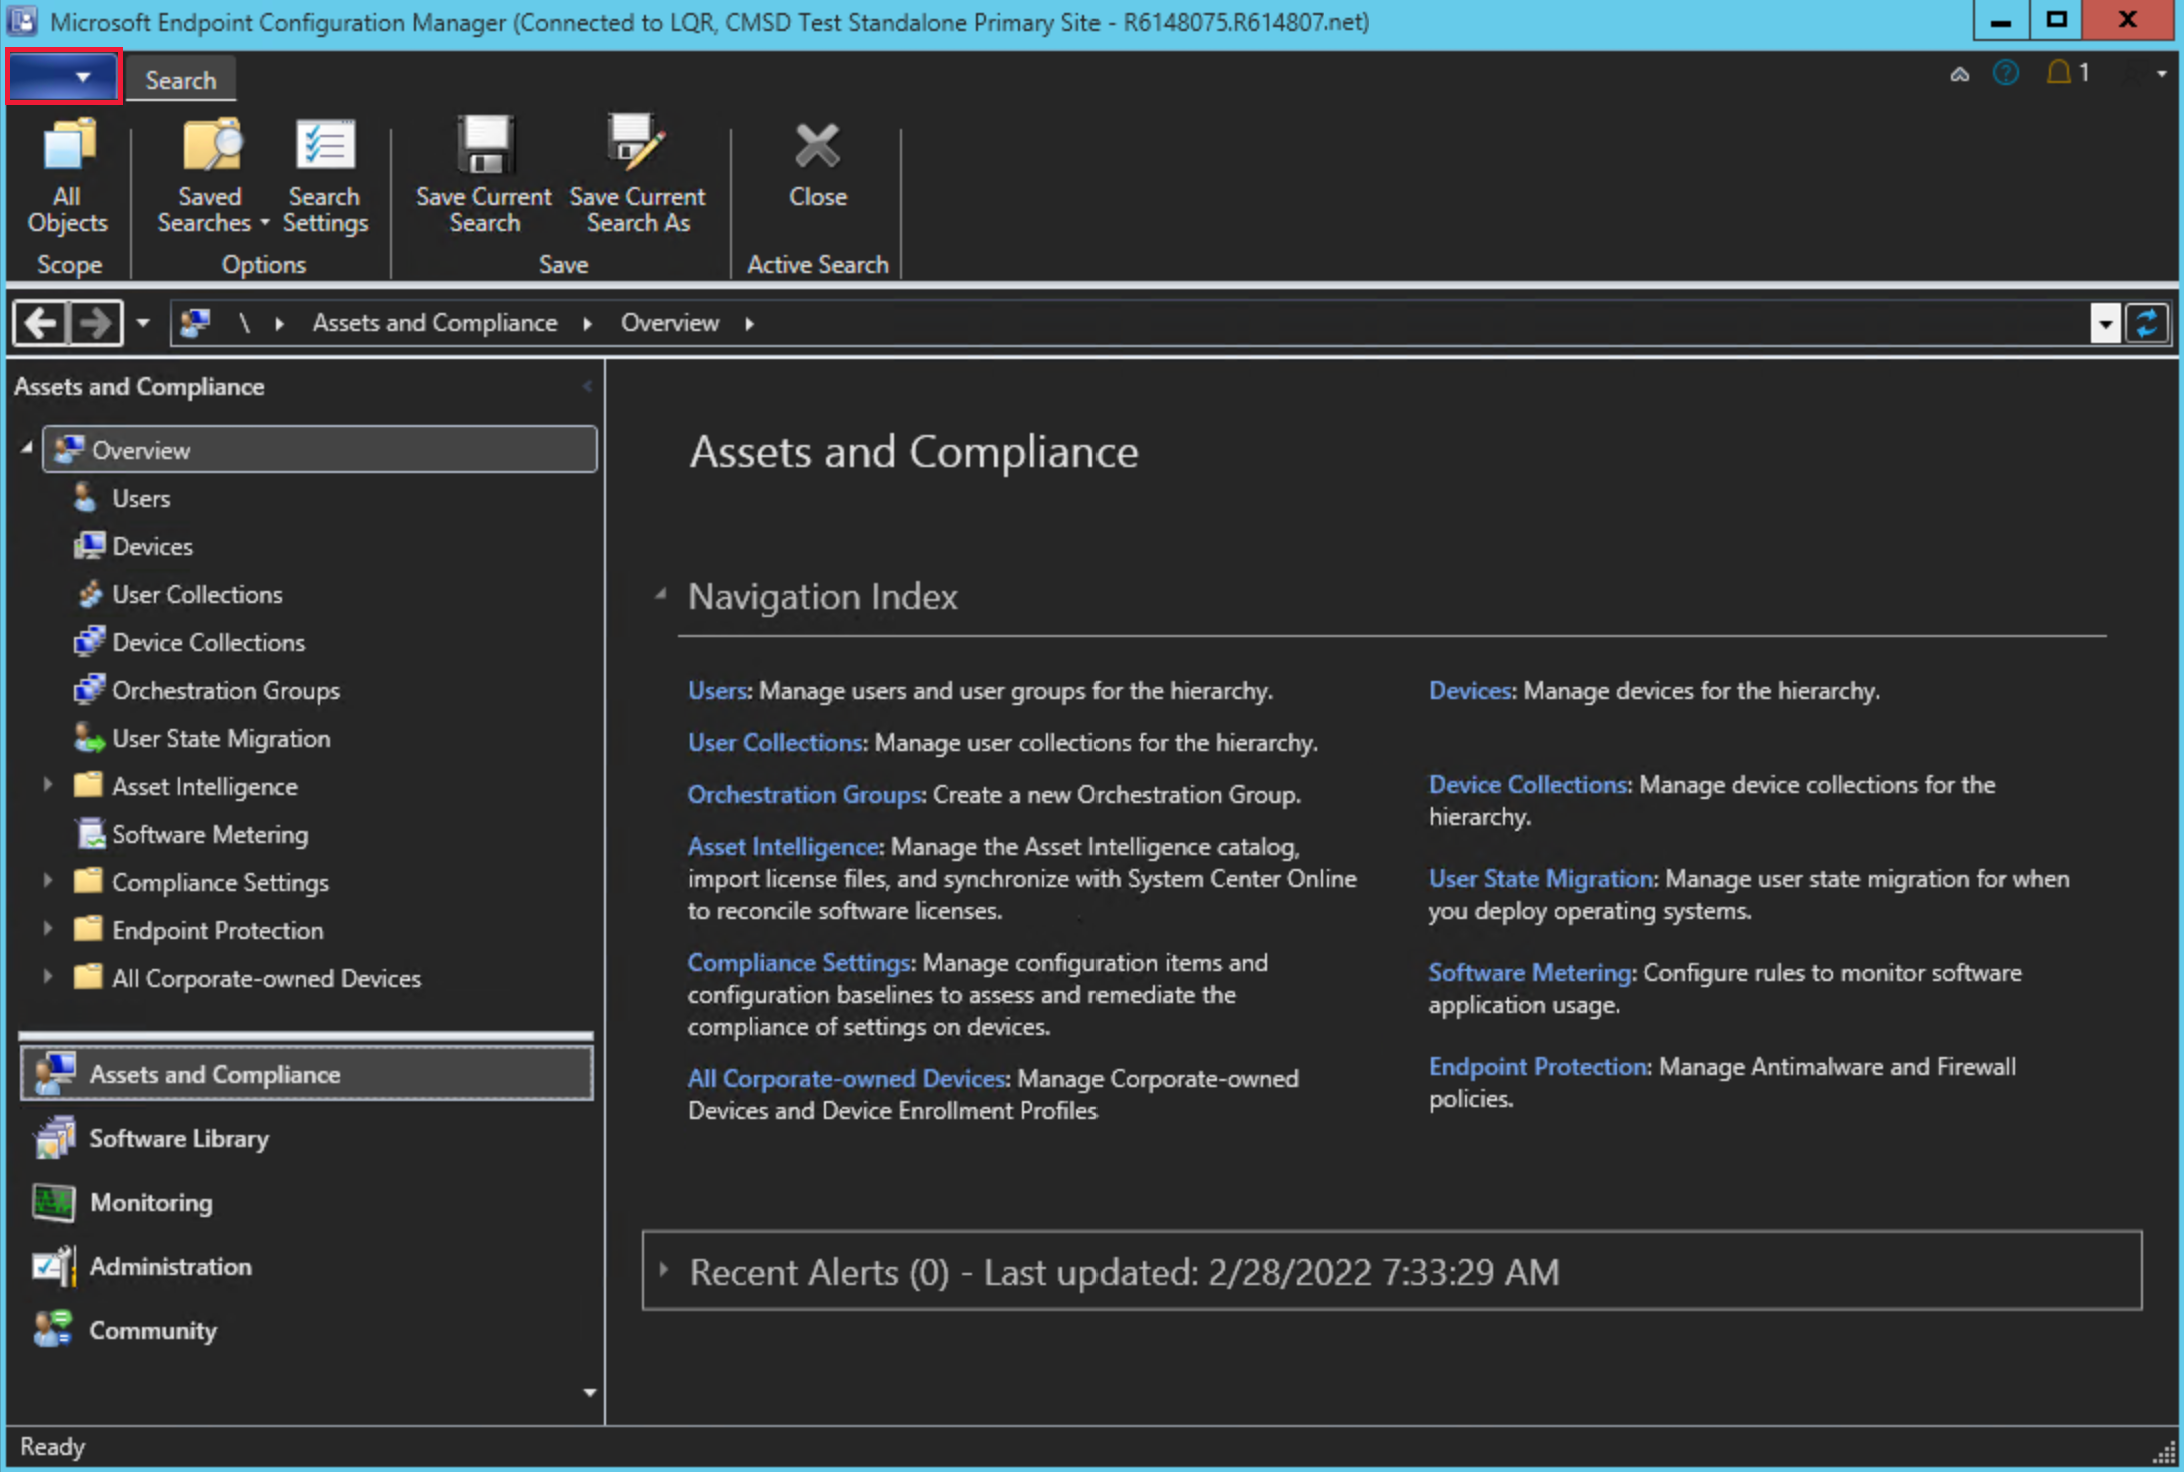 Screenshot of the Configuration Manager using the dark theme for the console. The 'Switch console theme' option is displayed in the upper right corner of the image.